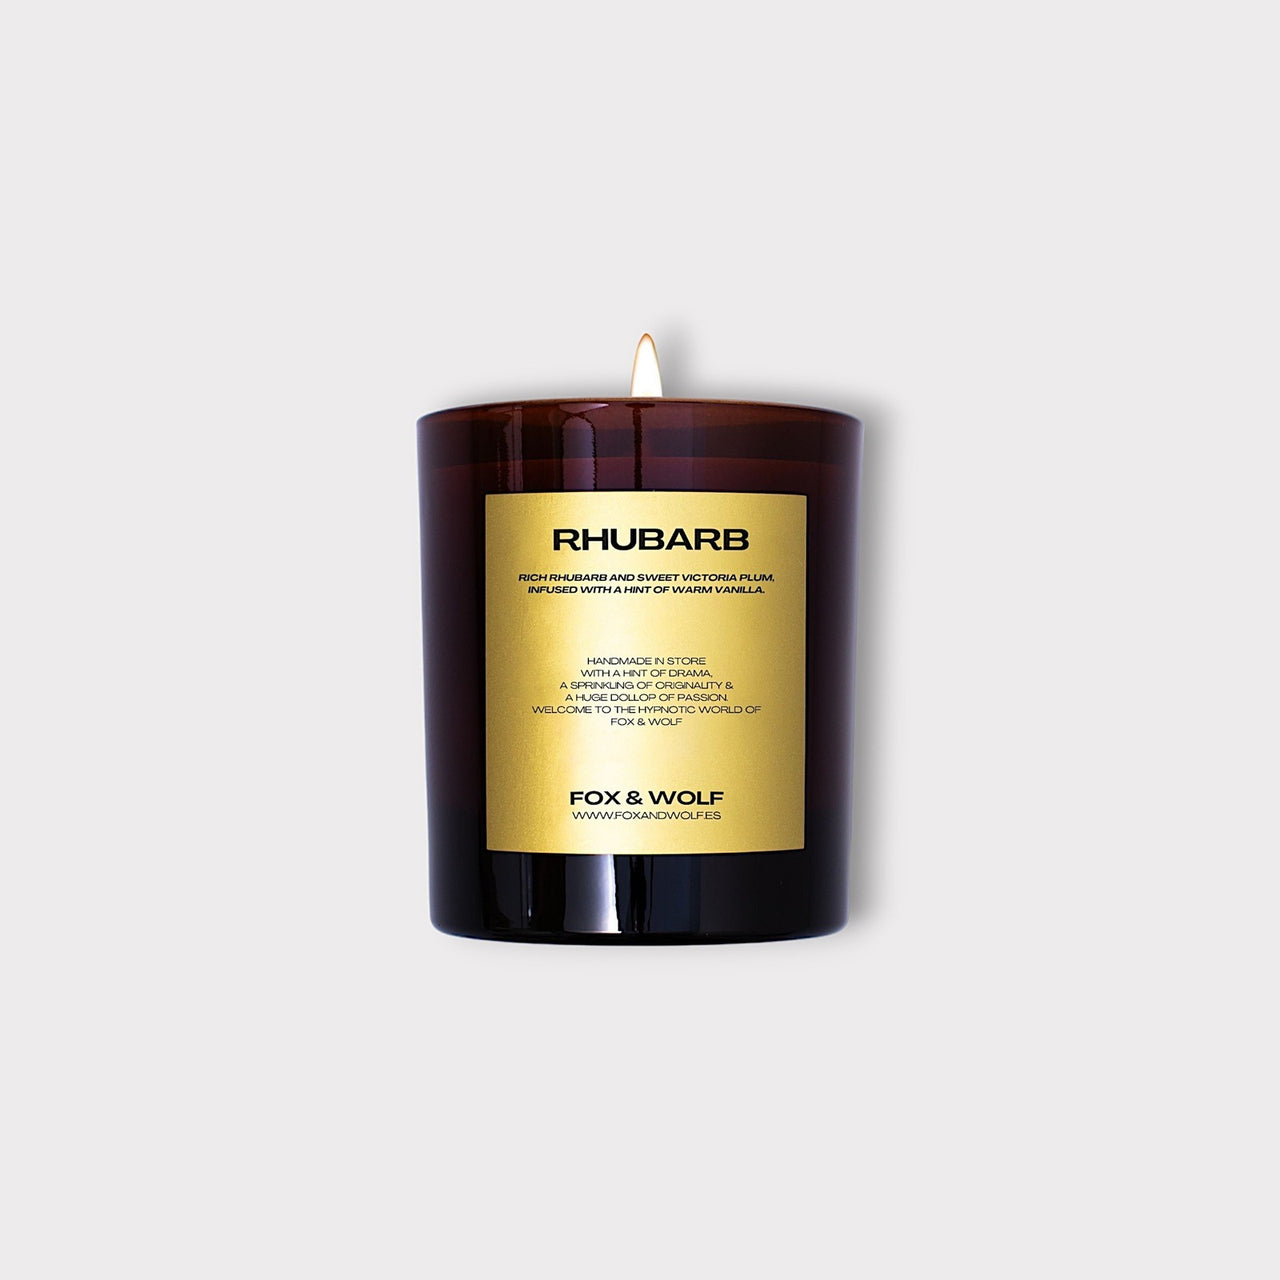 300 G RHUBARB SCENTED CANDLE